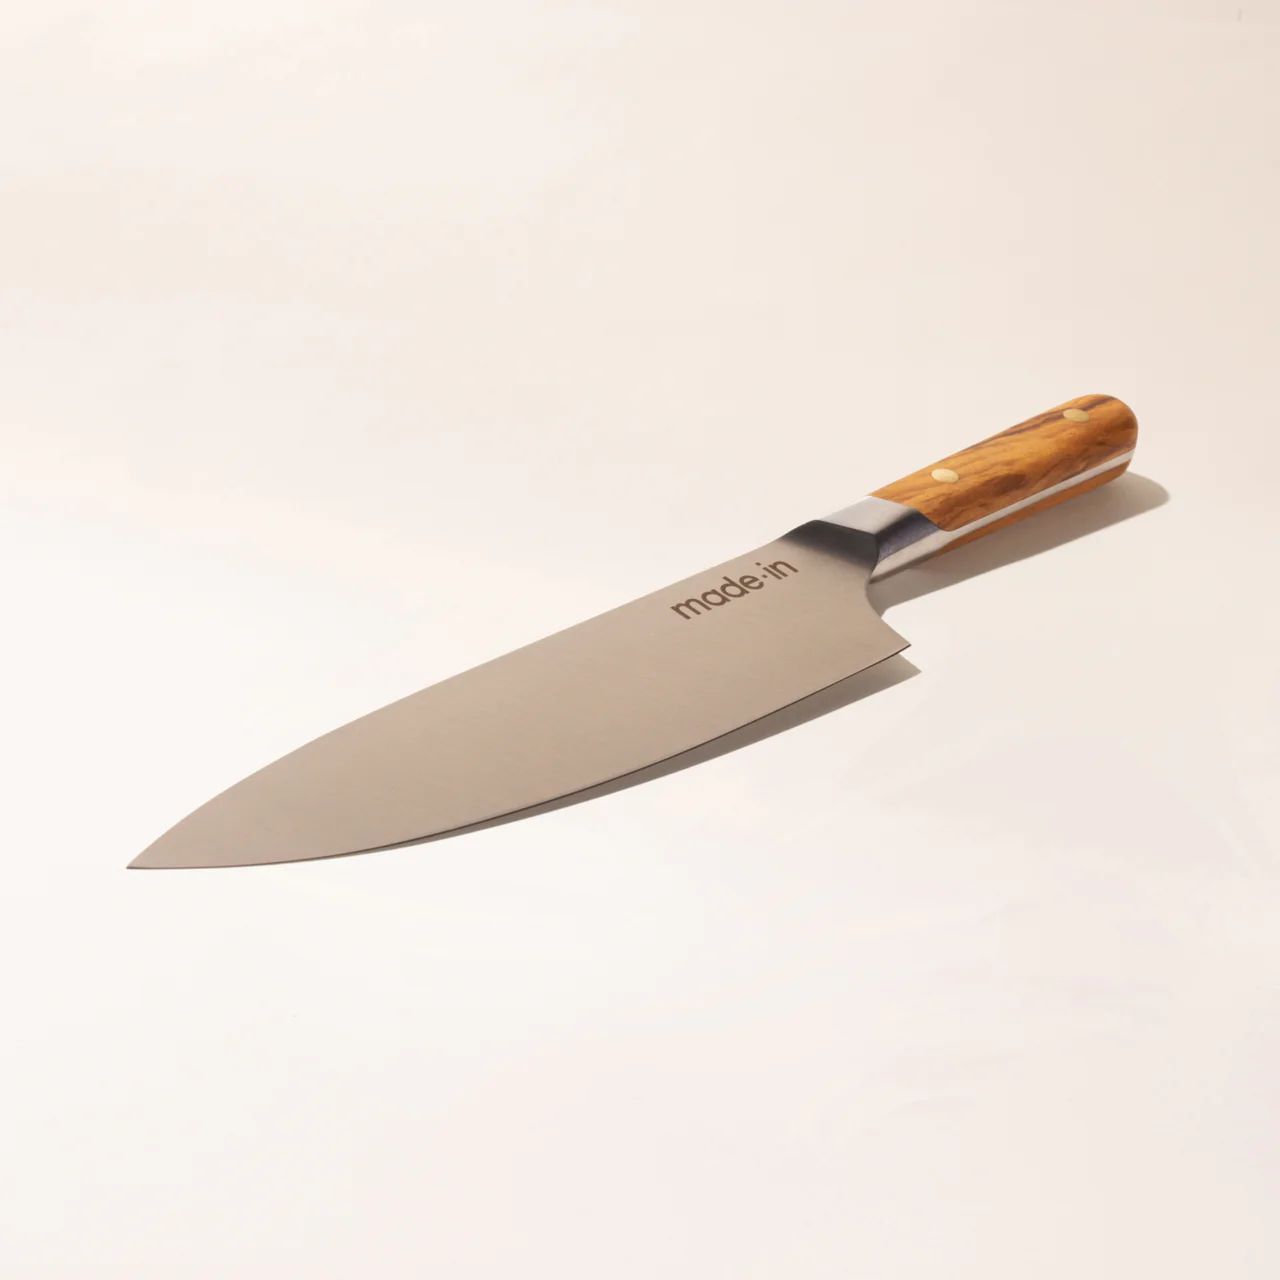 8 Inch Chef Knife | Full Tang |  Made In | Made In Cookware